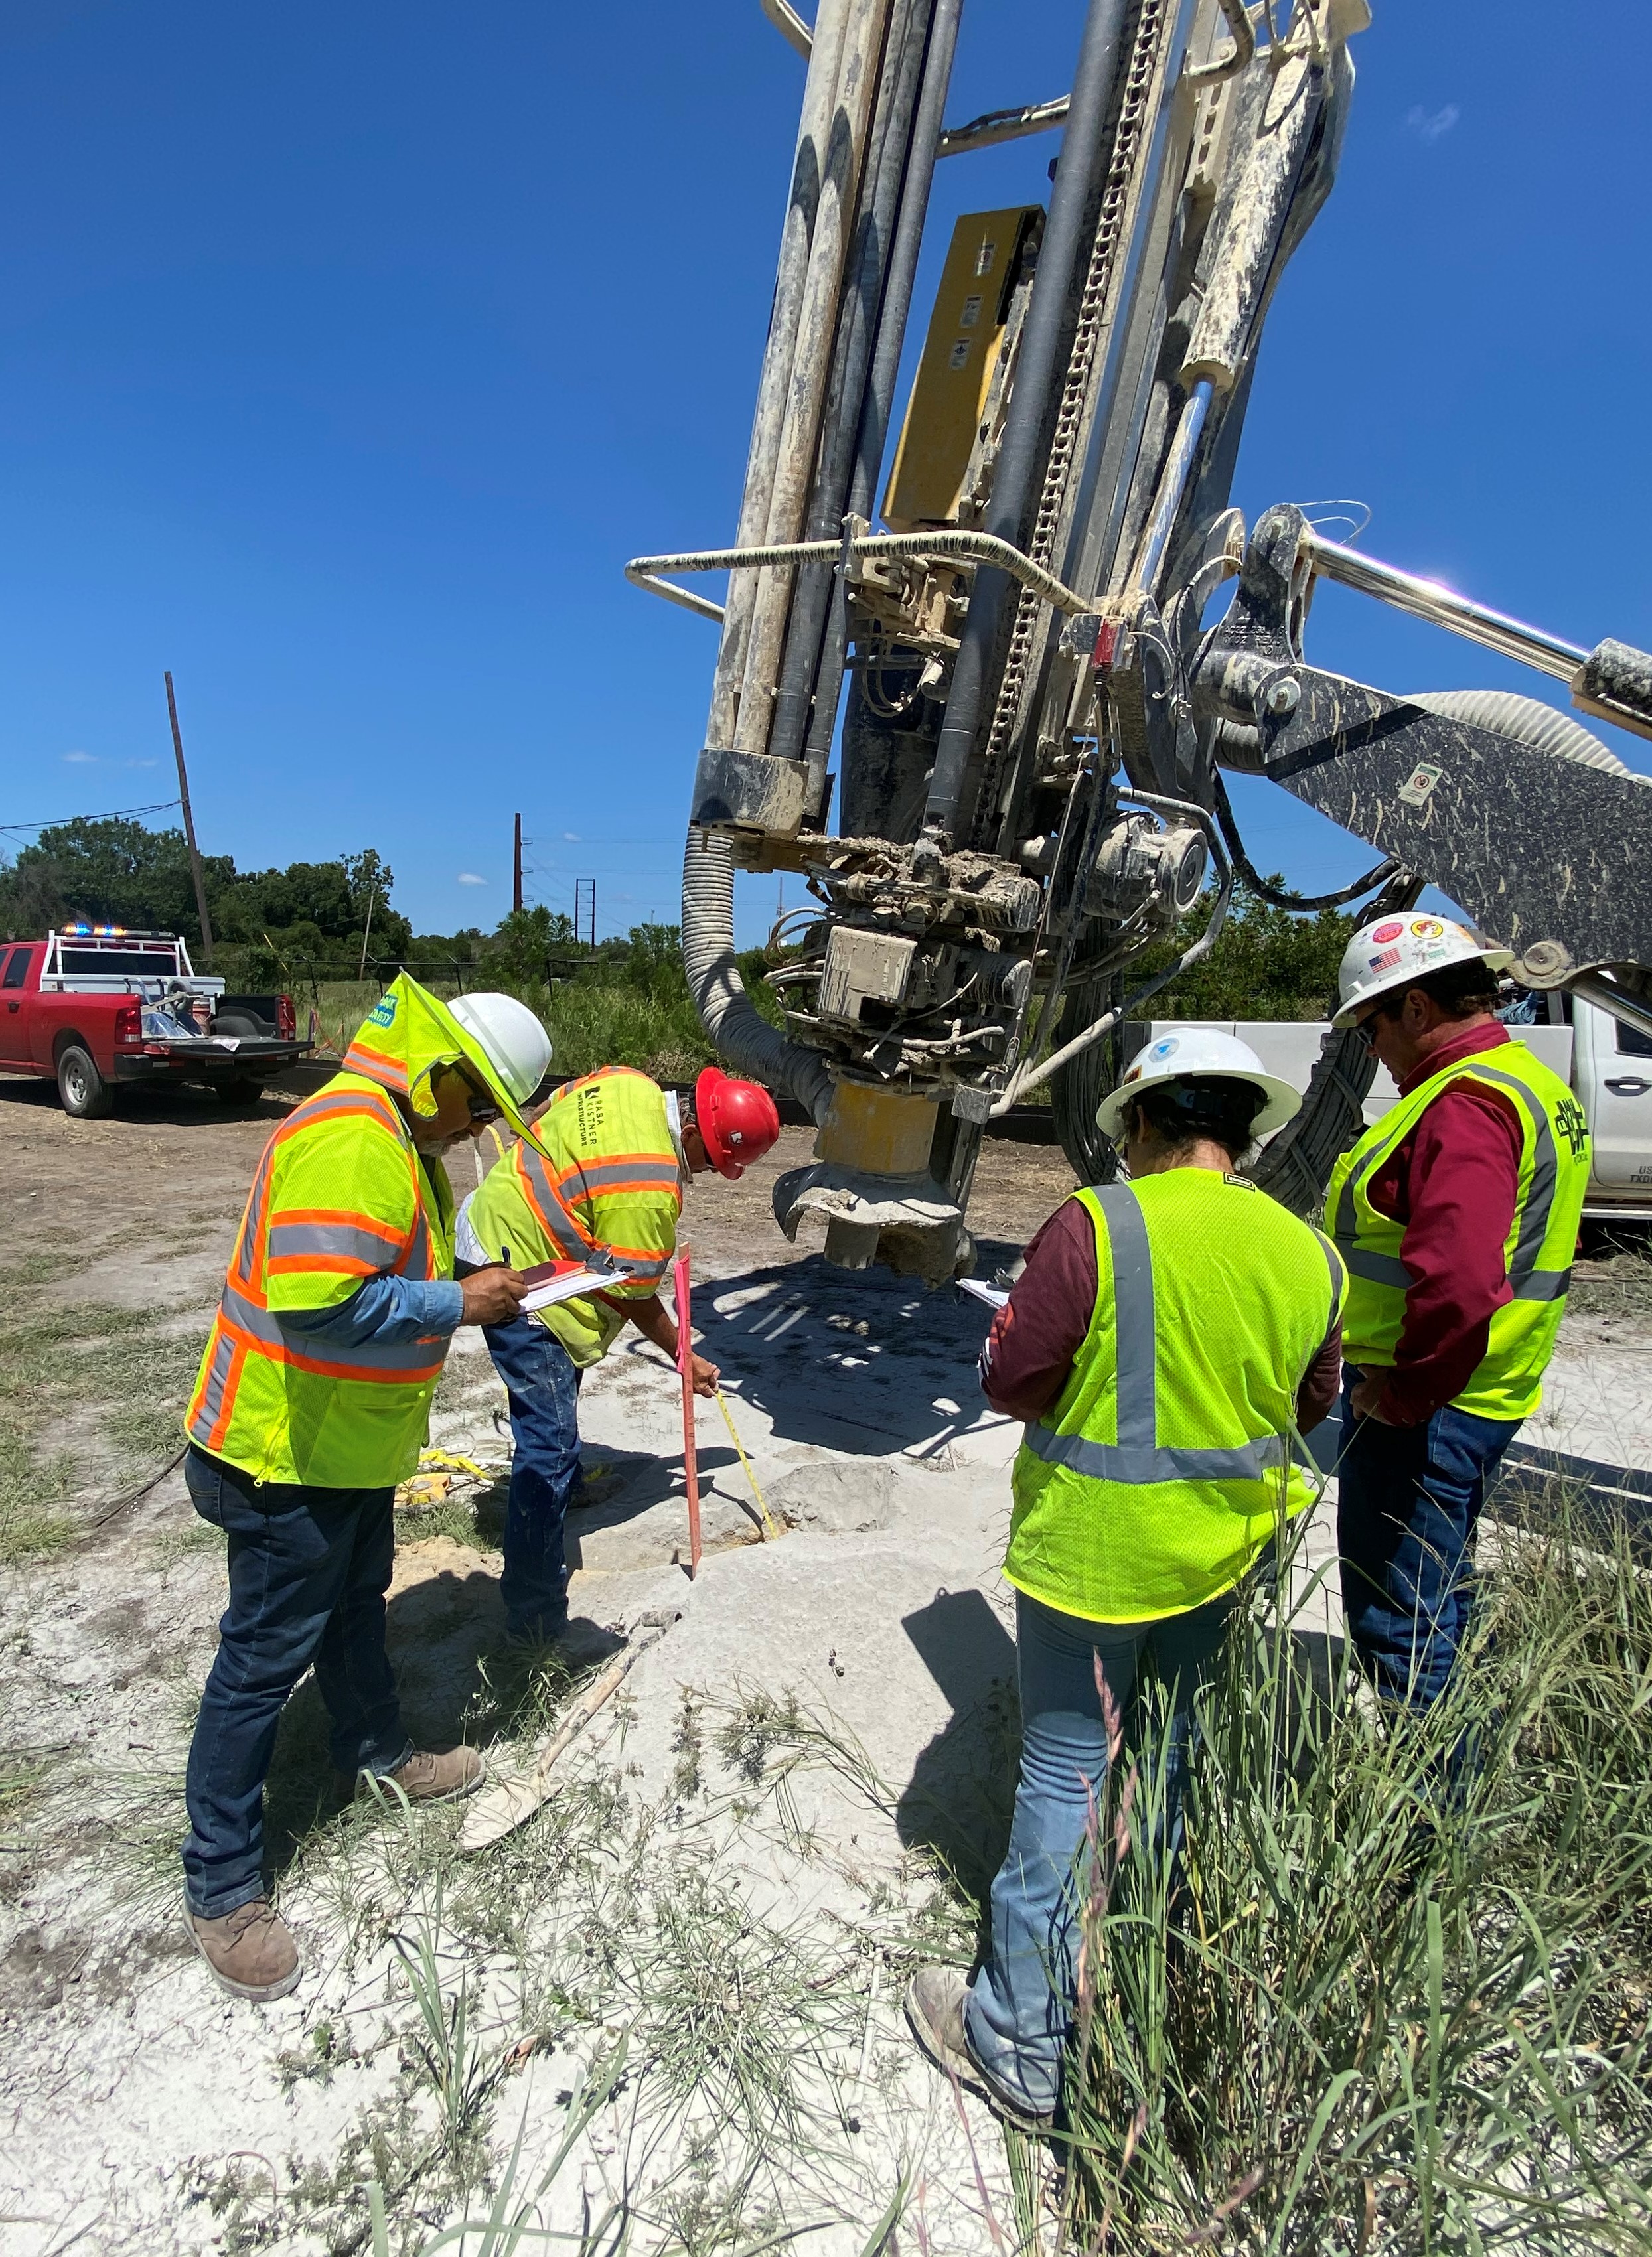 Our quality control teams measure each boring location to ensure drillers reached the proper depth, August 2021